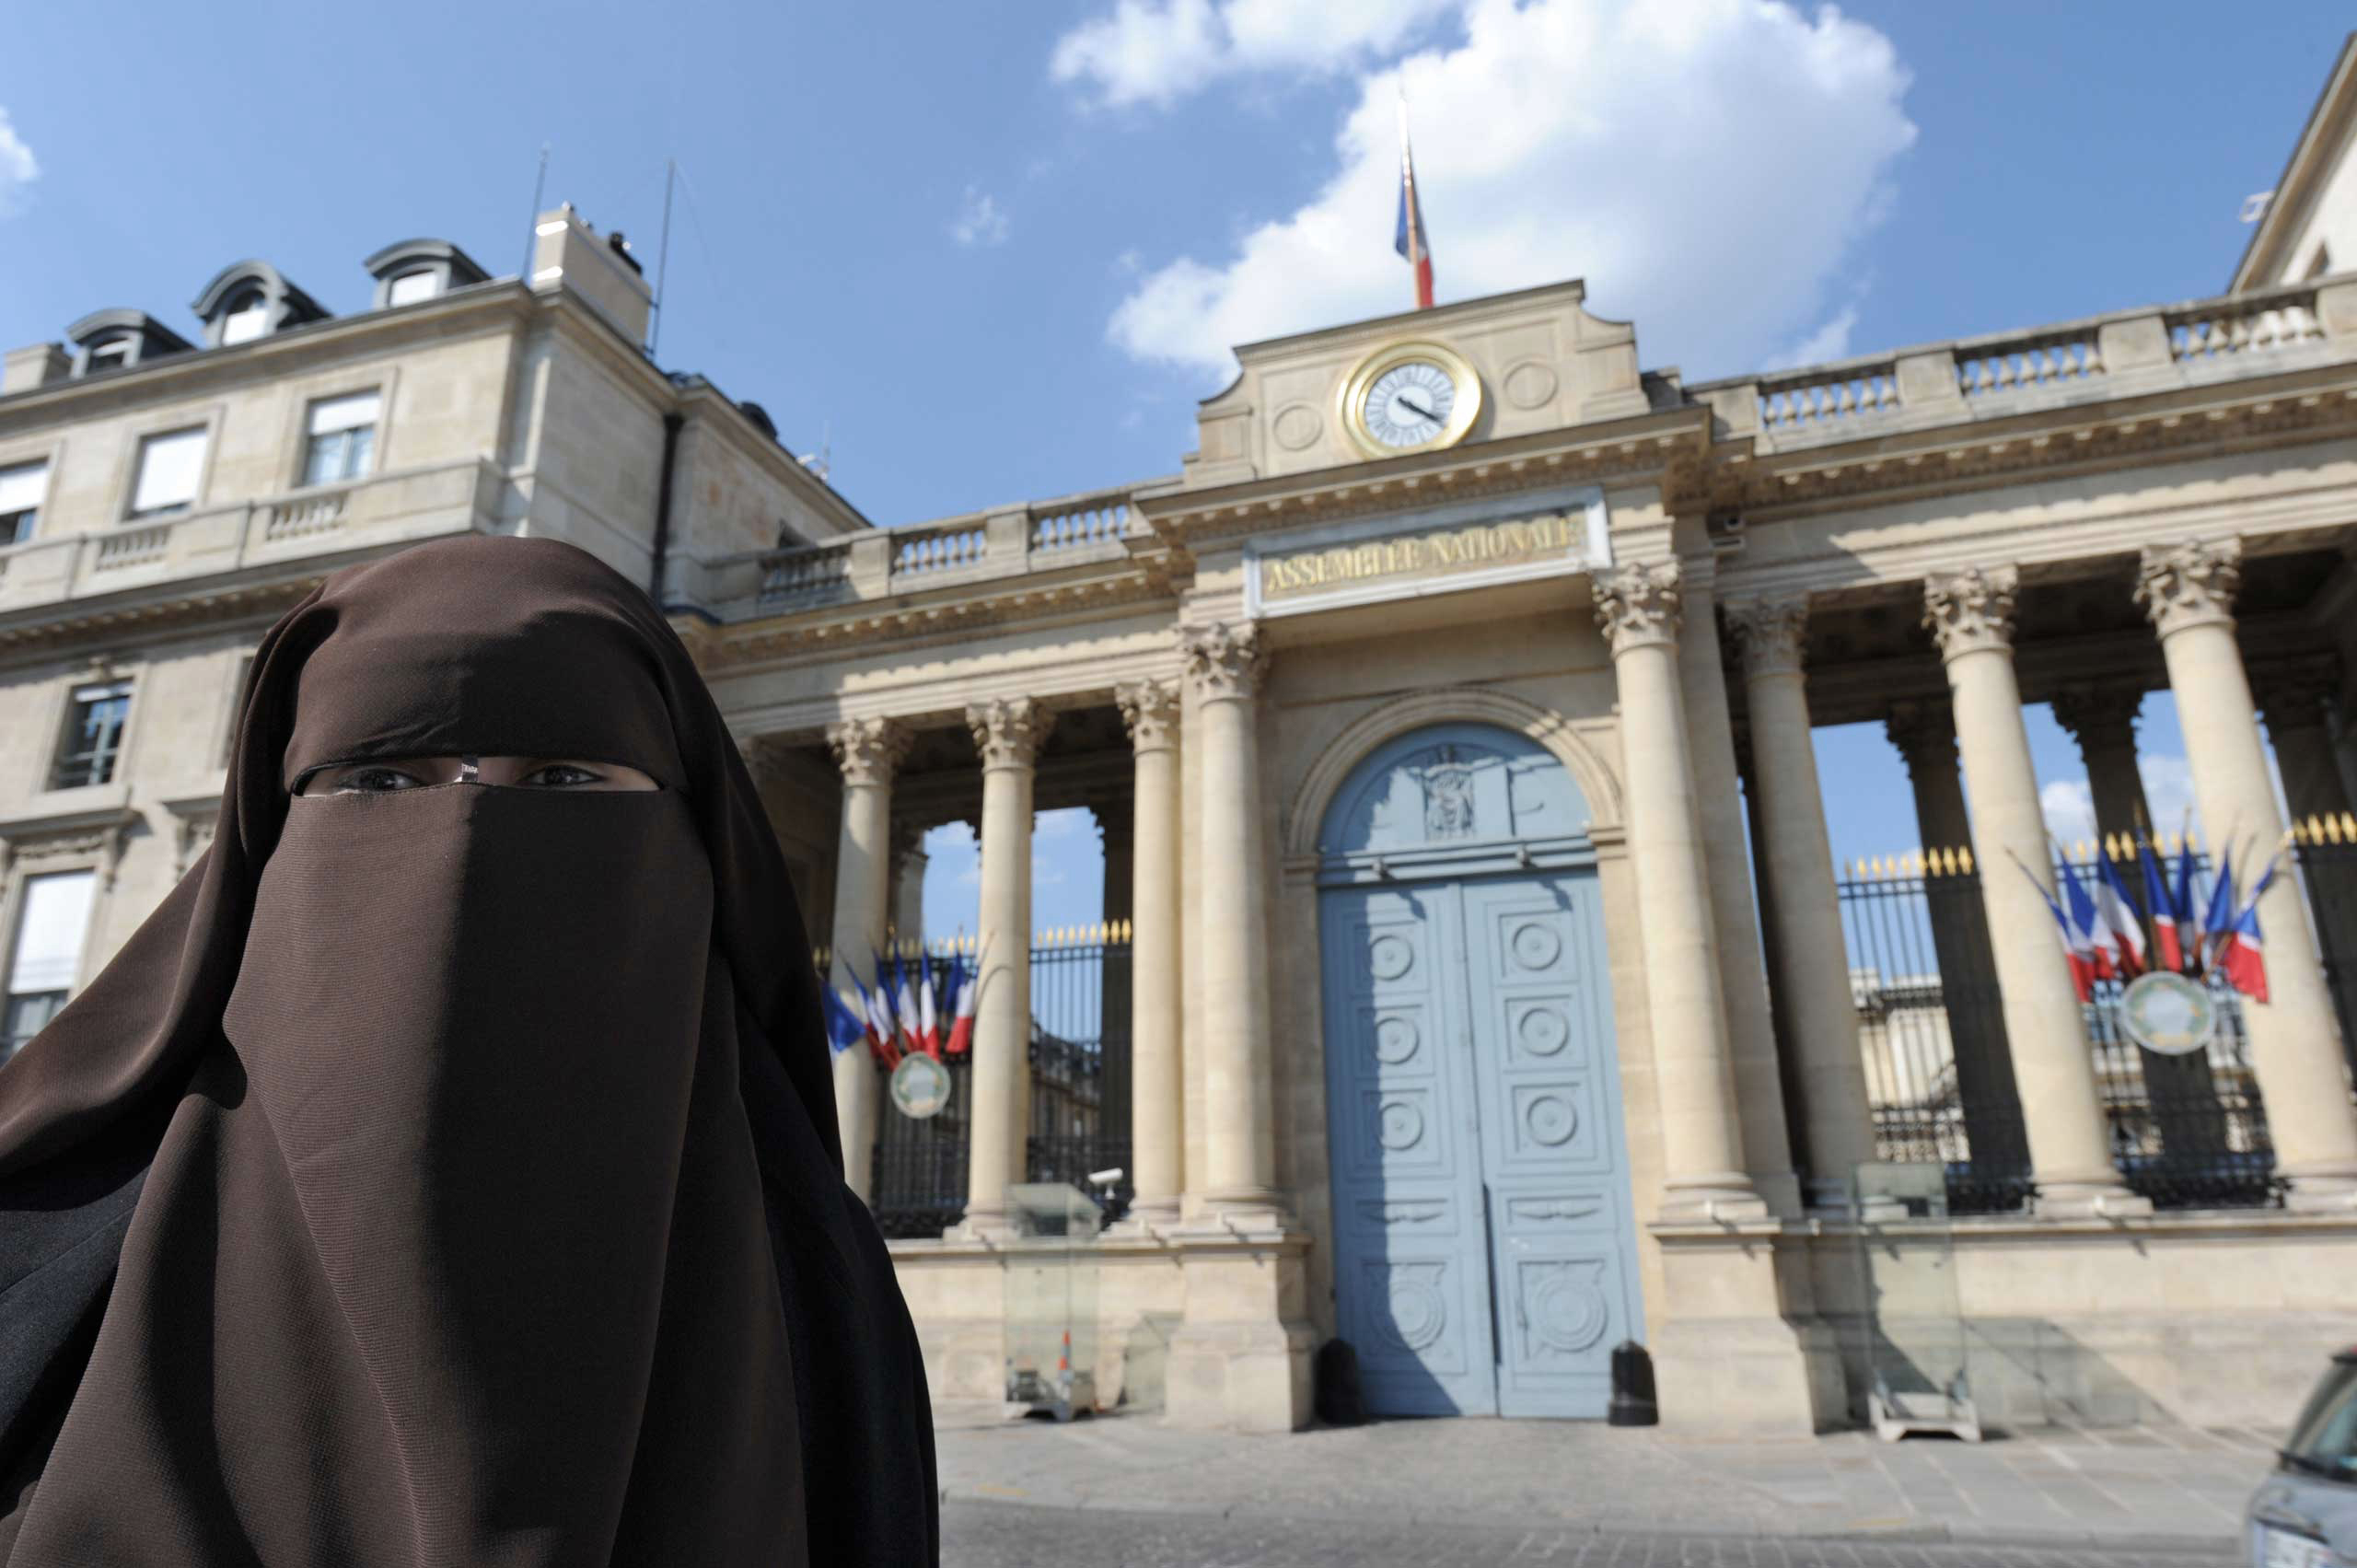 A woman poses in front of the French National Assembly to protest against ban on wearing full-face niqab veils in public, in Paris in 2011. (Mehdi Fedouach—AFP/Getty Images)